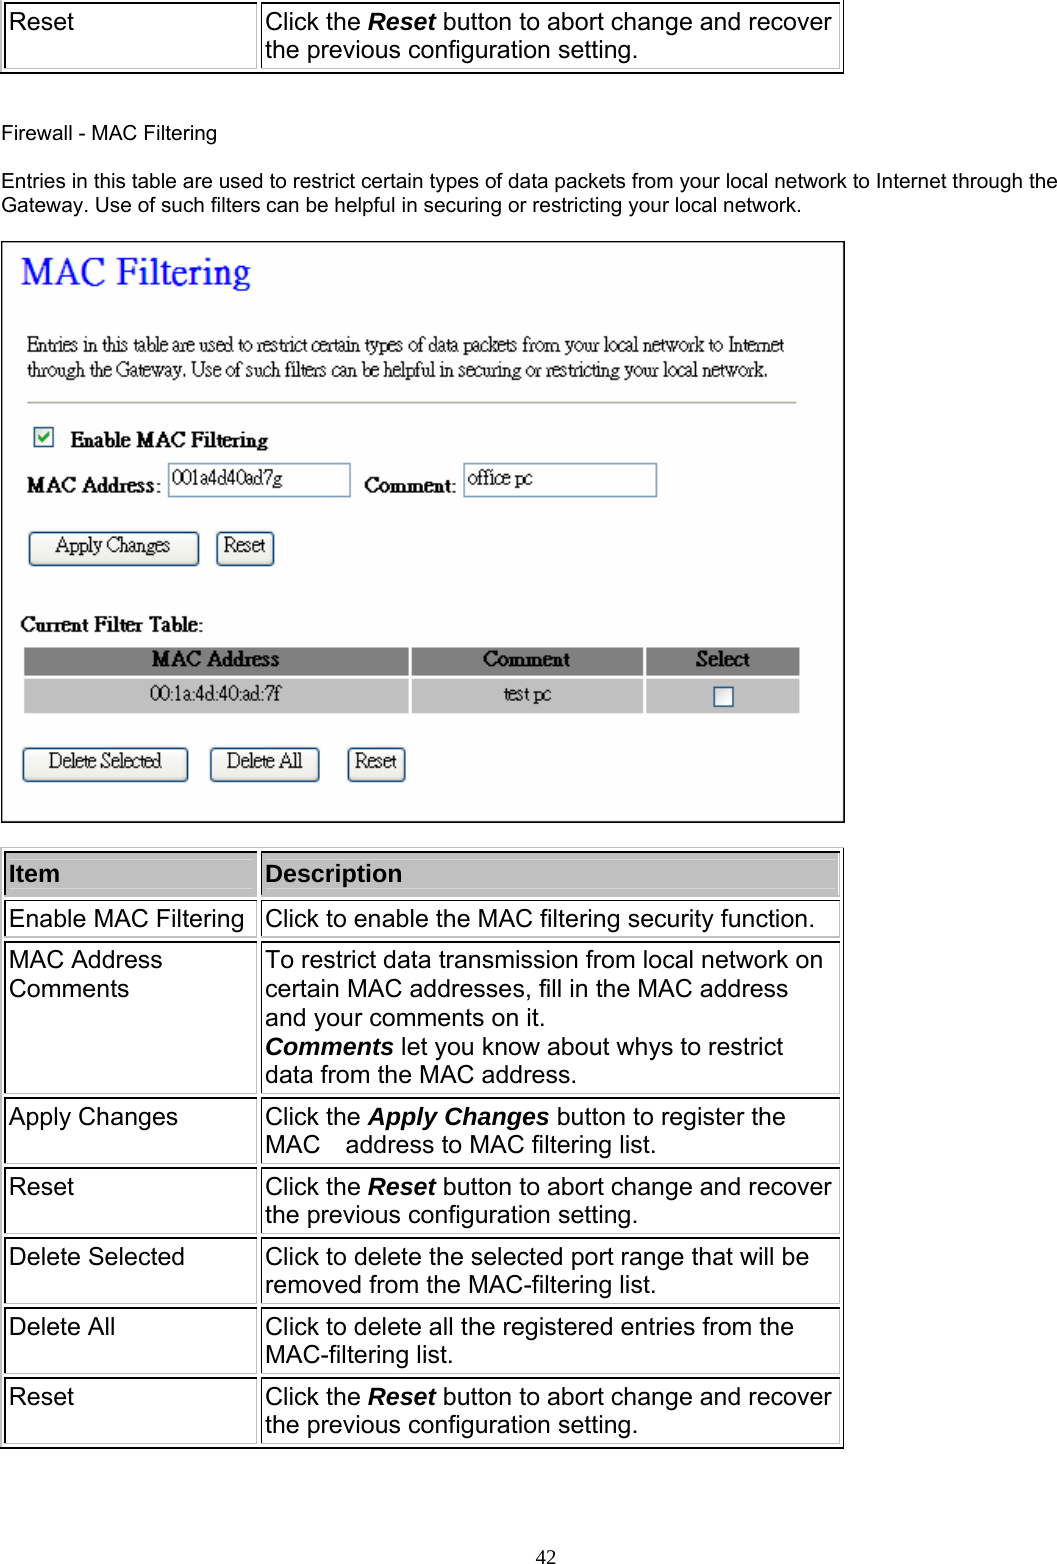 Reset Click the Reset button to abort change and recover the previous configuration setting.   Firewall - MAC Filtering  Entries in this table are used to restrict certain types of data packets from your local network to Internet through the Gateway. Use of such filters can be helpful in securing or restricting your local network.    Item  Description Enable MAC Filtering  Click to enable the MAC filtering security function. MAC Address Comments  To restrict data transmission from local network on certain MAC addresses, fill in the MAC address and your comments on it. Comments let you know about whys to restrict data from the MAC address. Apply Changes  Click the Apply Changes button to register the MAC    address to MAC filtering list. Reset Click the Reset button to abort change and recover the previous configuration setting. Delete Selected  Click to delete the selected port range that will be removed from the MAC-filtering list. Delete All  Click to delete all the registered entries from the MAC-filtering list. Reset Click the Reset button to abort change and recover the previous configuration setting.       42